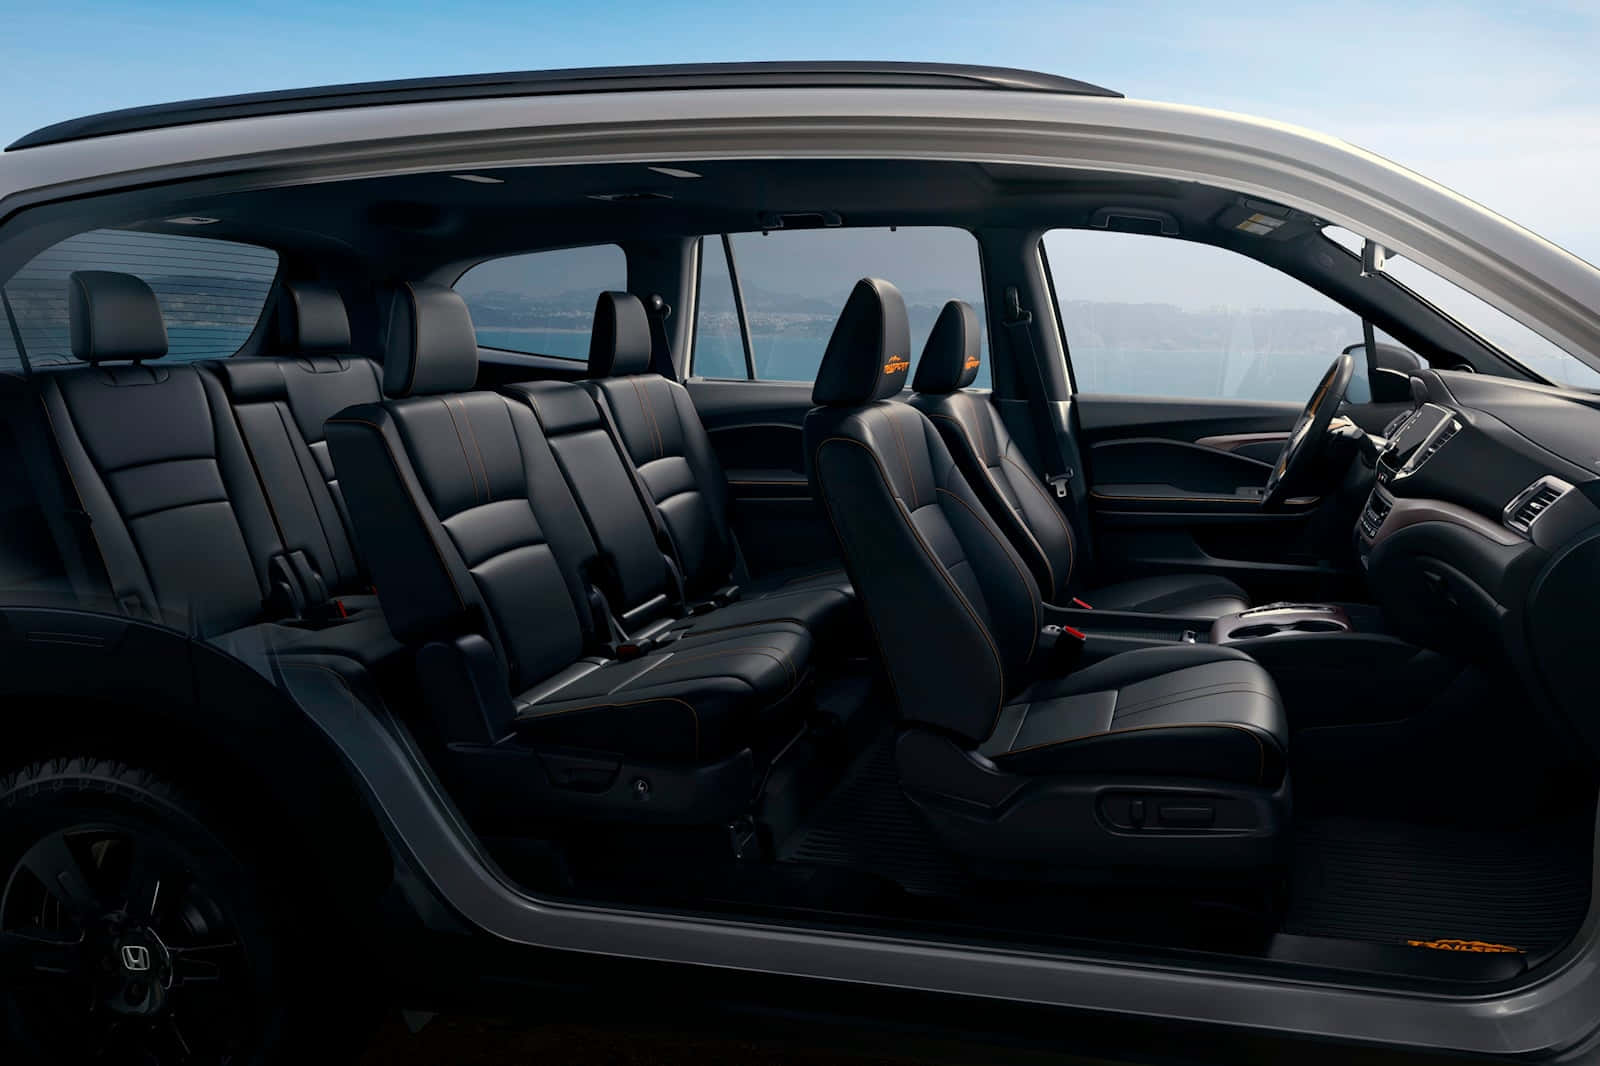 Get Ready for the Open Road in the Honda Pilot